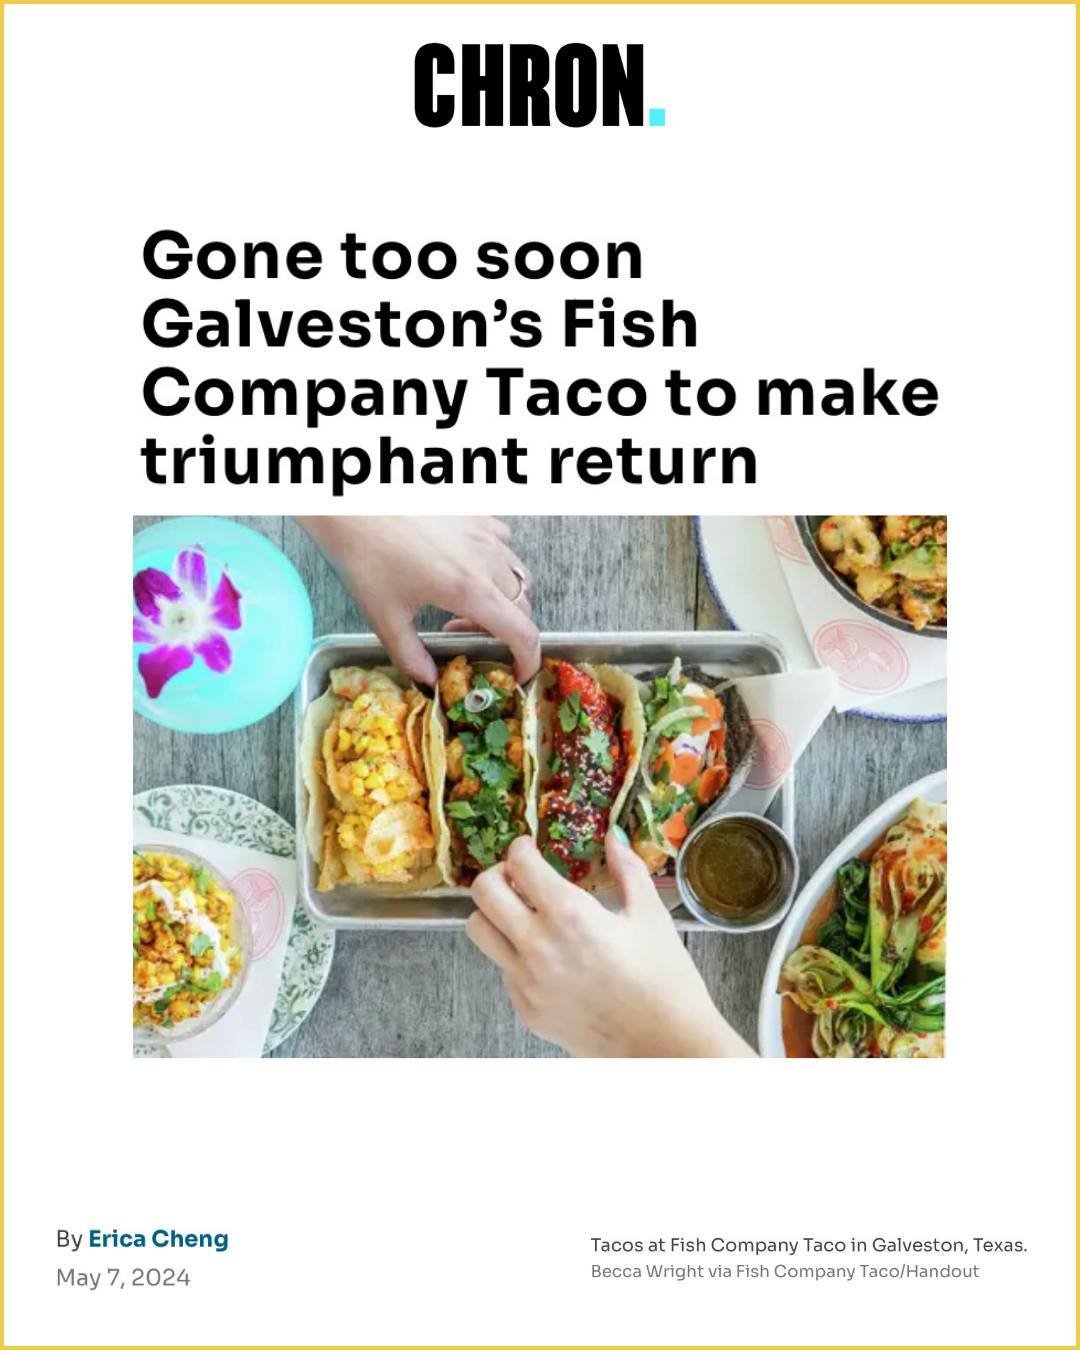 We're thrilled to finally share that @razhalili and the @piersixseafood crew will soon make waves in Galveston by reviving island darling @fishcompanytaco to serve up globally inspired Gulf-to-table tacos and beach worthy cocktails! Thanks for sharin